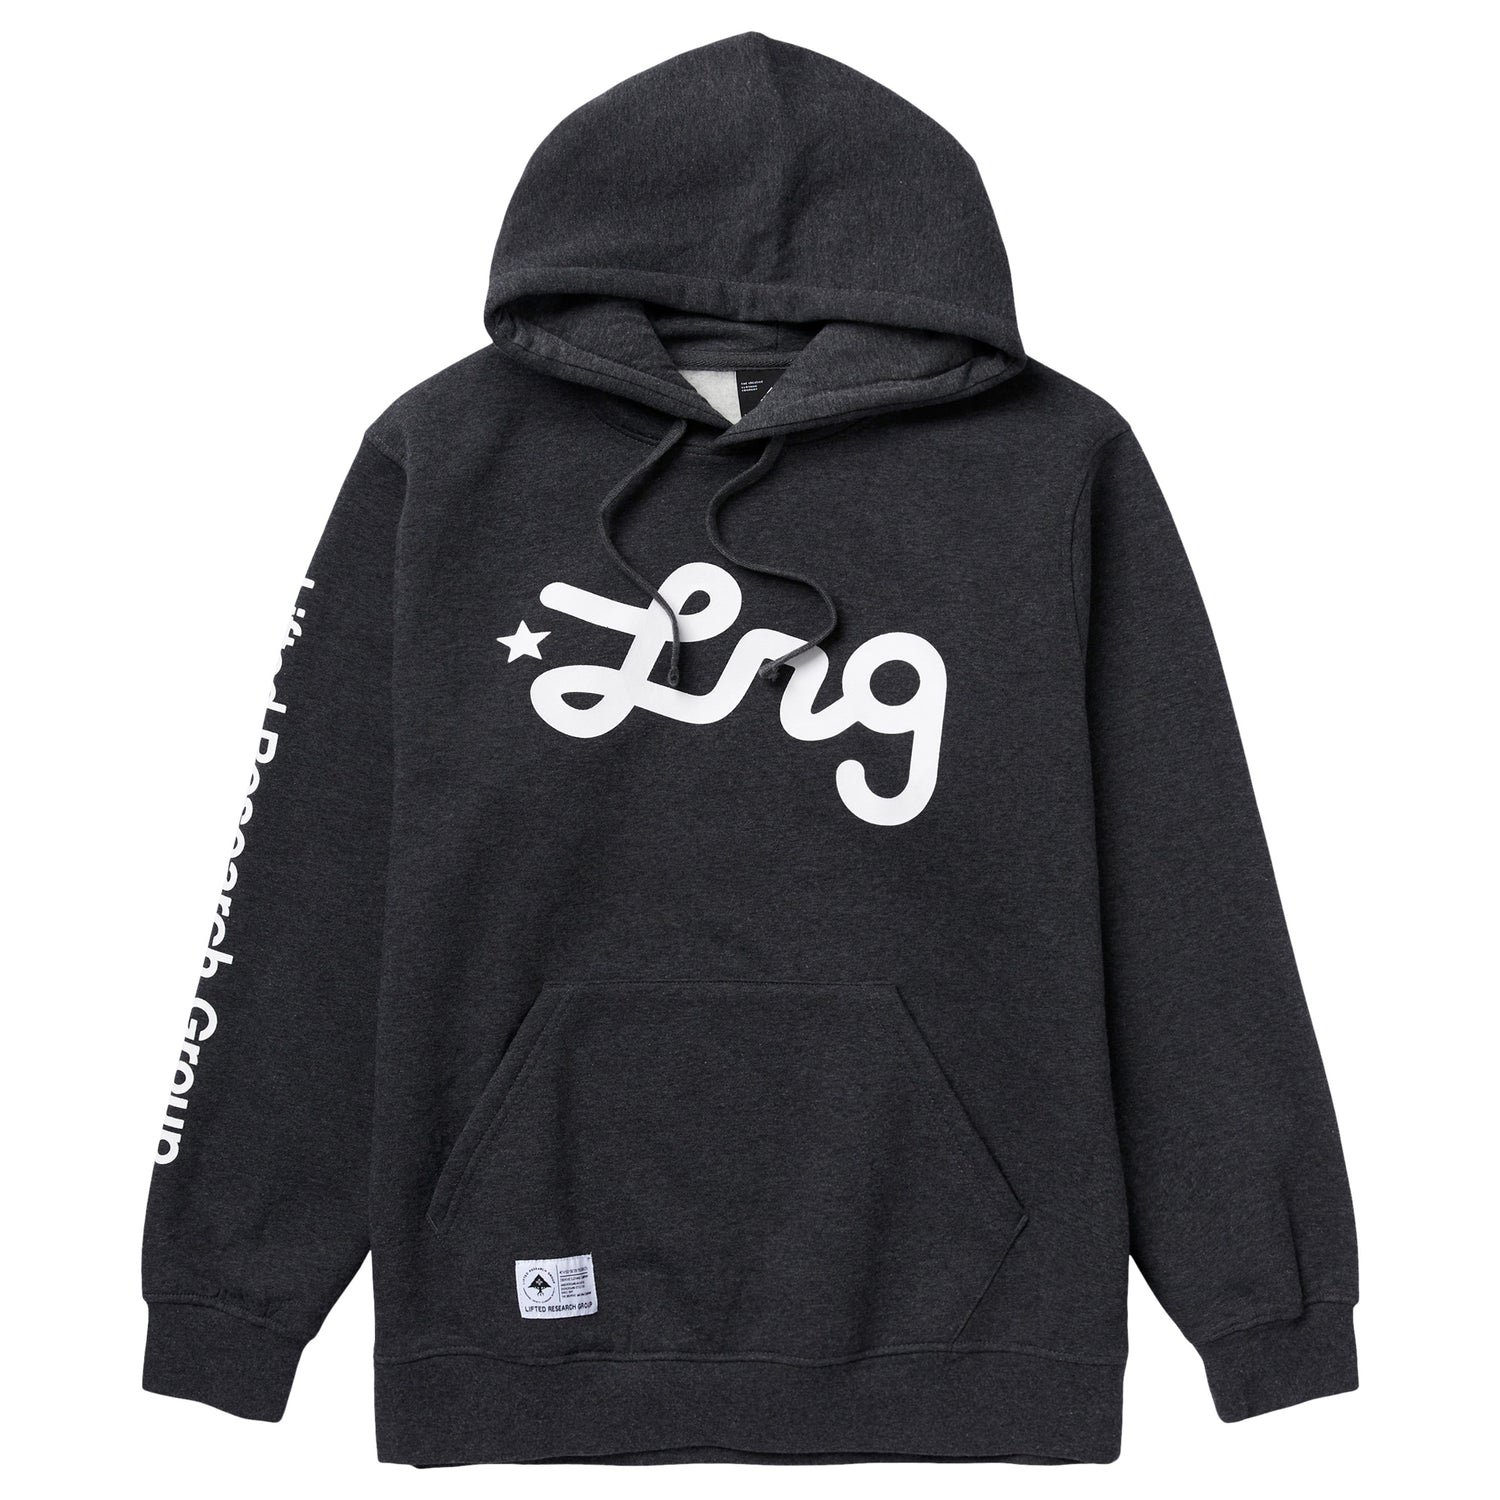 LIFTED SCRIPT PULLOVER HOODIE - CHARCOAL HEATHER